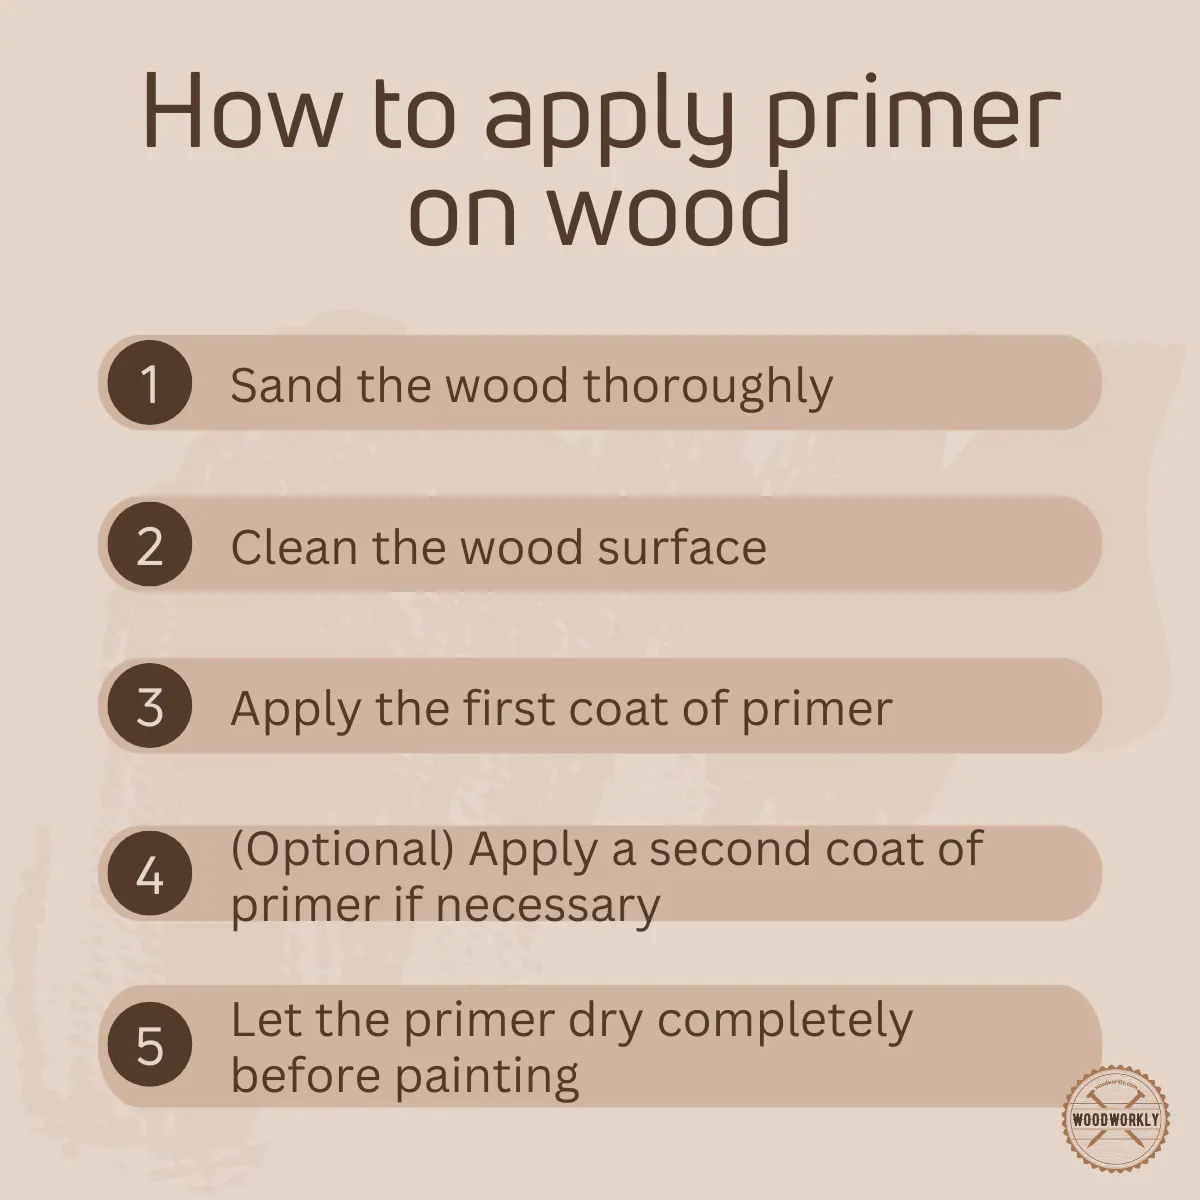 How to apply primer on wood